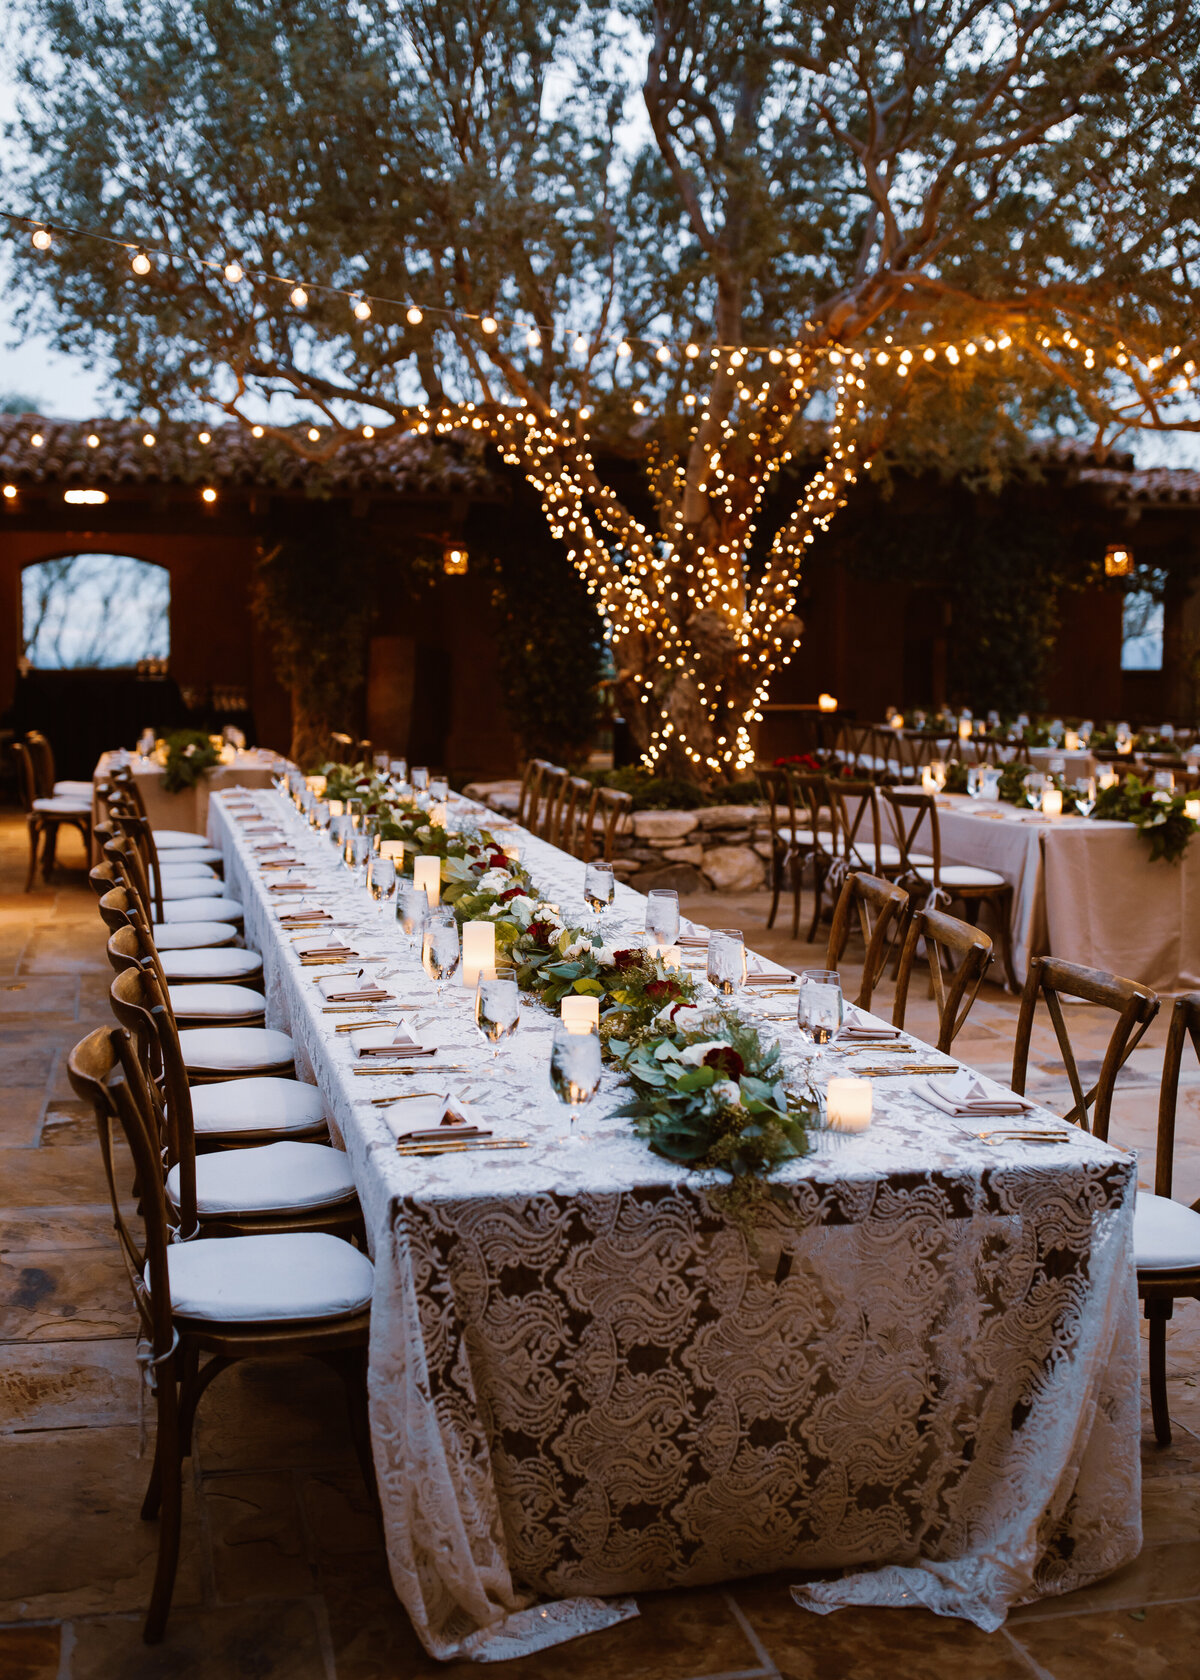 A wedding reception is set on a lace tablecloth in Spain.